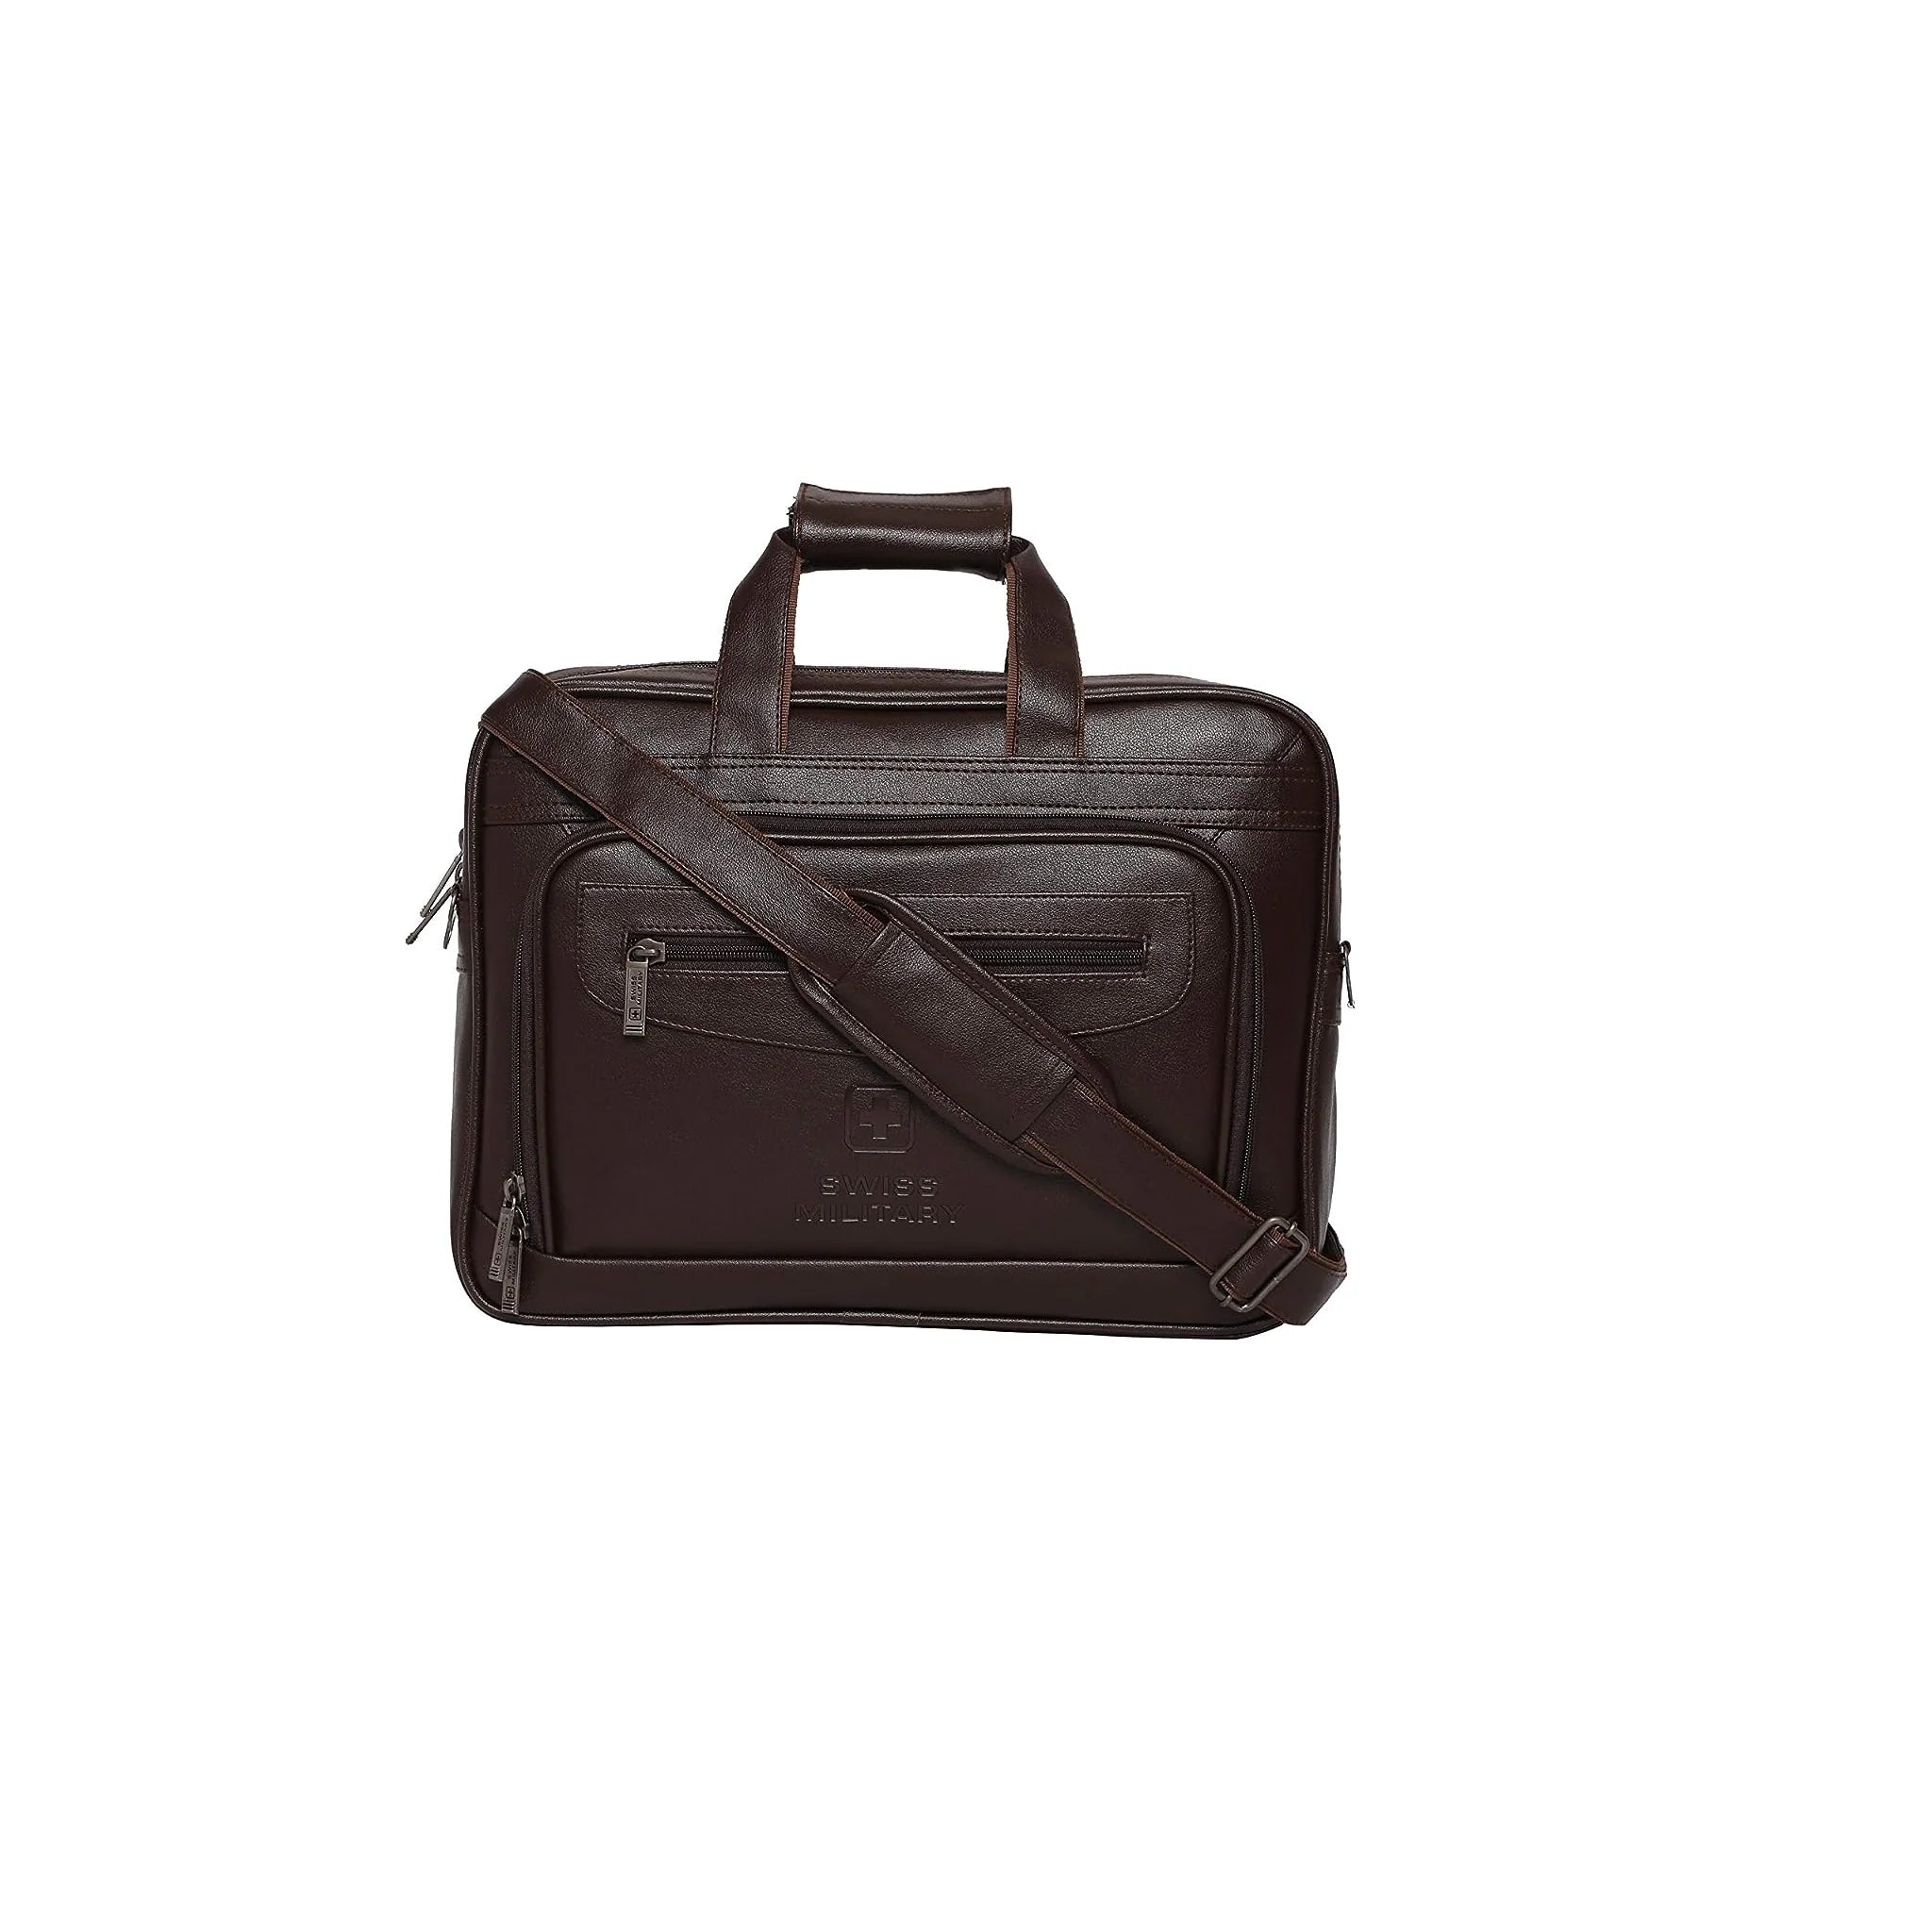 Swiss Military 14 Ltrs Dark Brown Softsided Briefcase (Plb2)